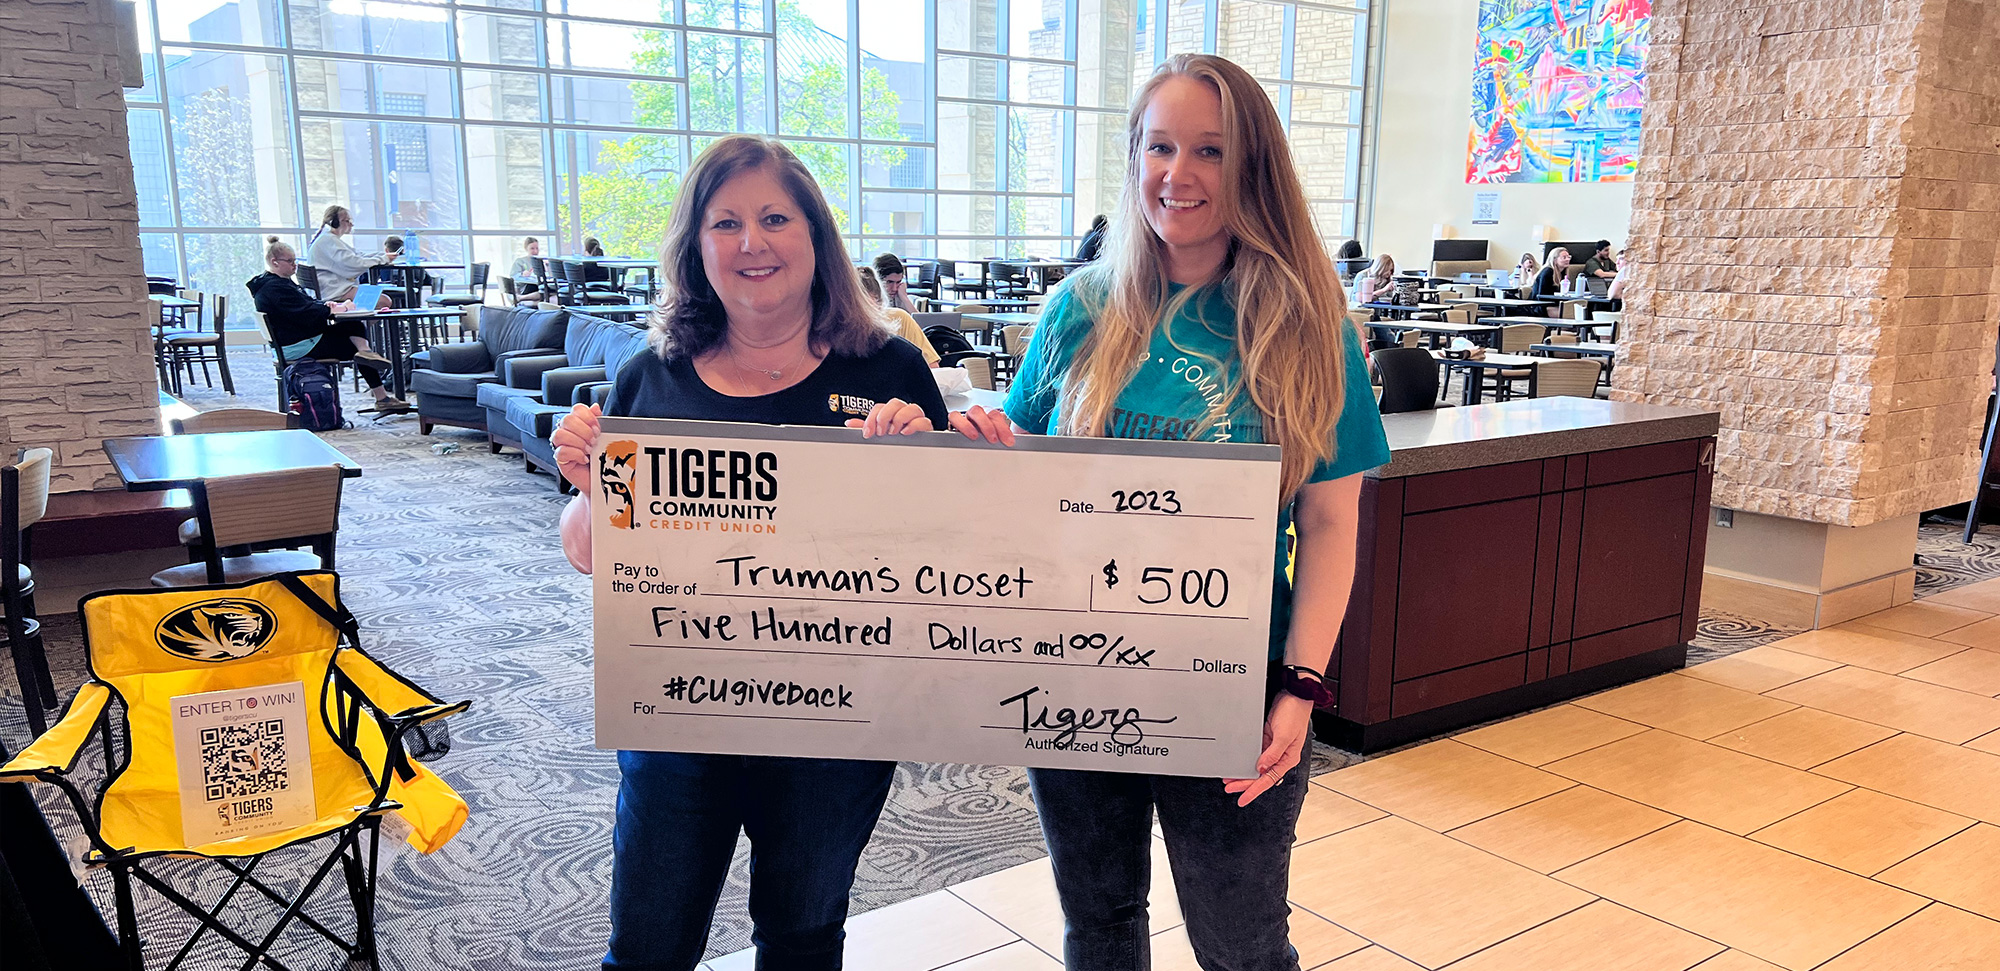 Tigers Community Credit Union Raises Awareness and Funds for Truman’s Closet